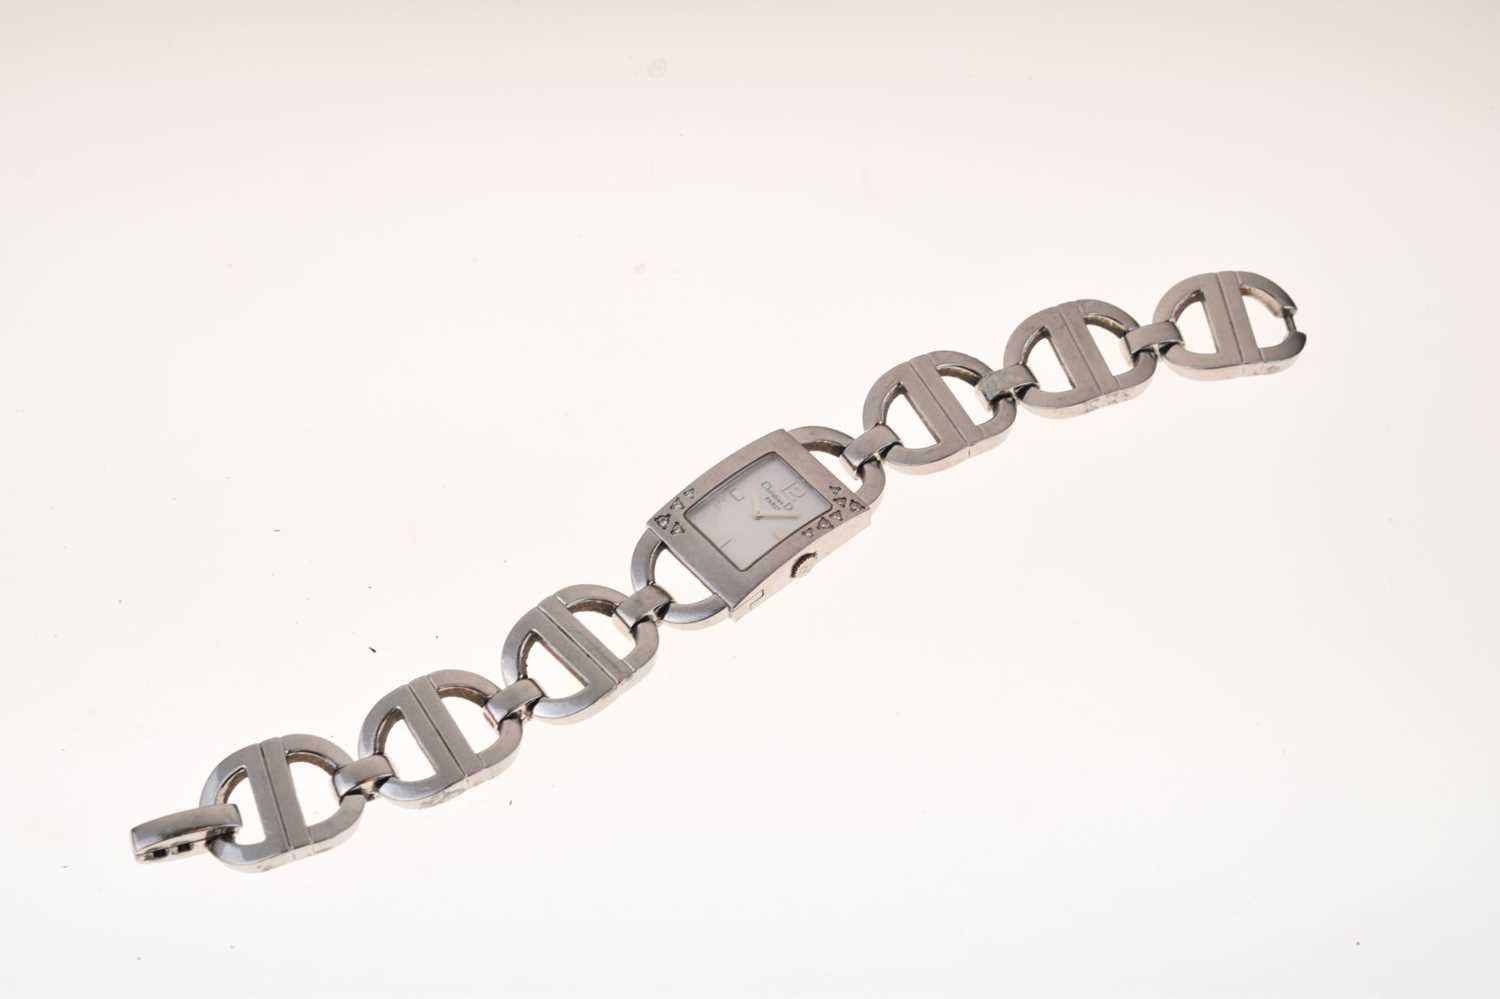 Christian Dior - Lady's stainless steel bracelet watch - Image 2 of 8